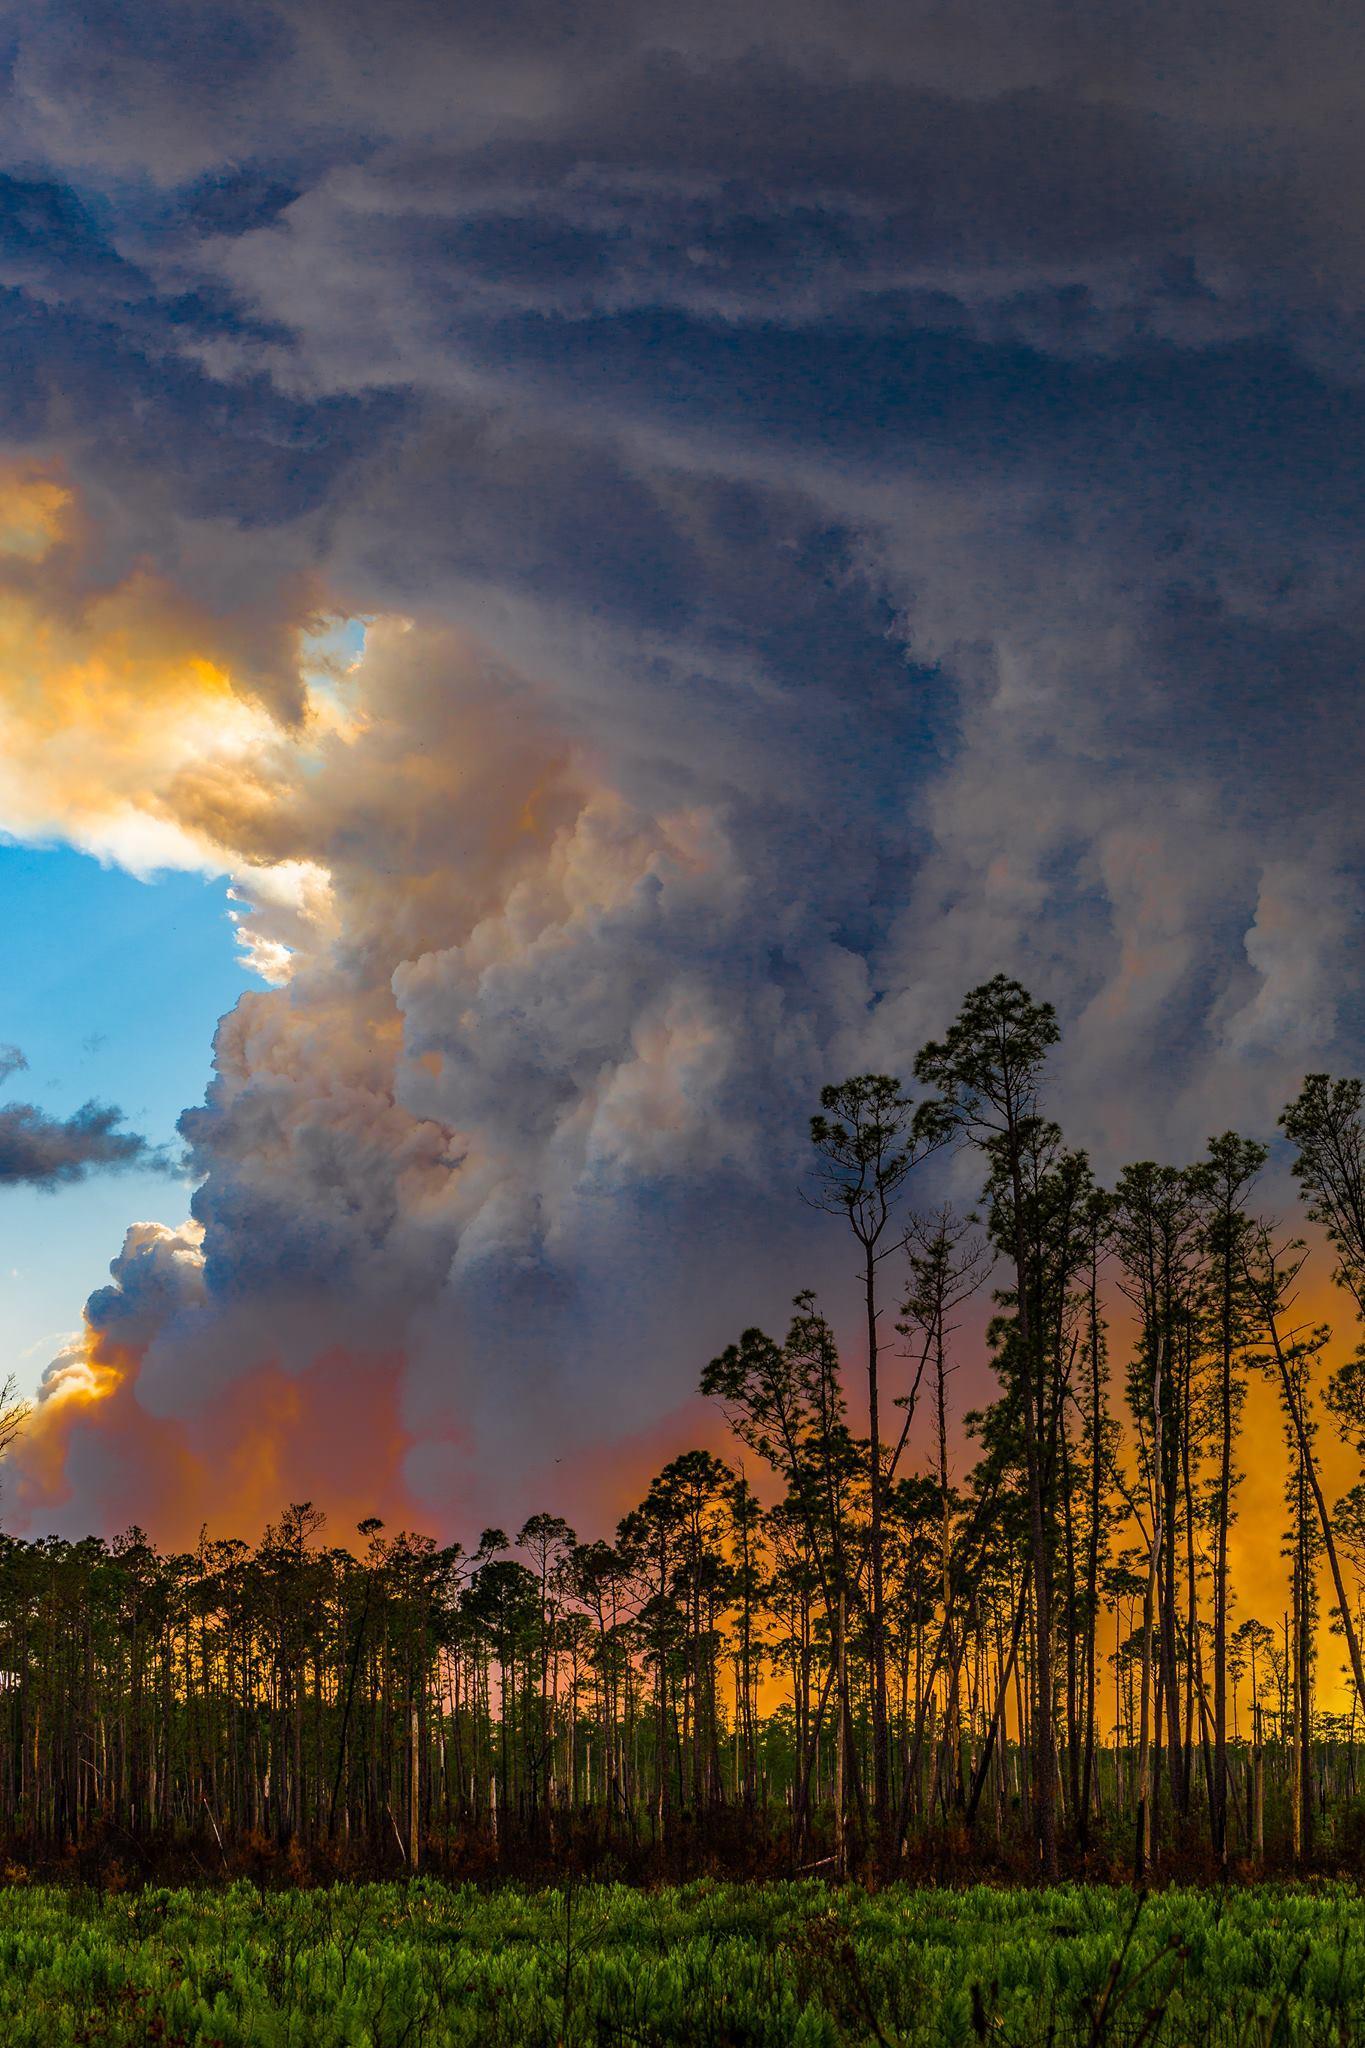 Smoke rises from the wildfire burning across 150,000 acres of the Okefenokee Swamp in Georgia and Florida. (Credit: Jim Pixley/USFWS)